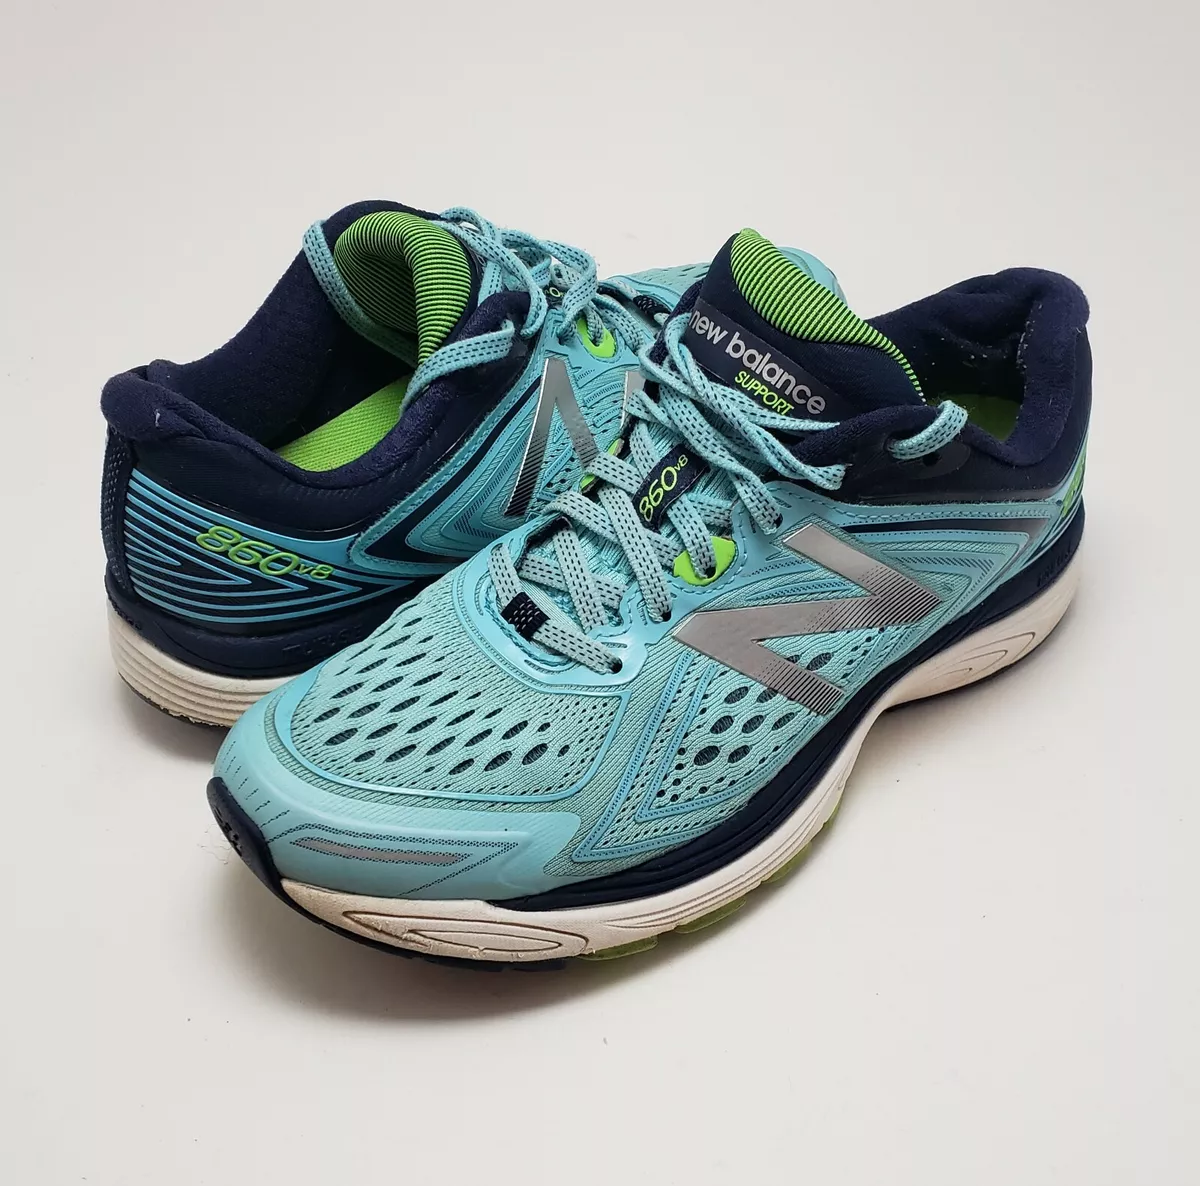 New 860v8 Asym Counter Blue Running Sneakers Size 8 eBay